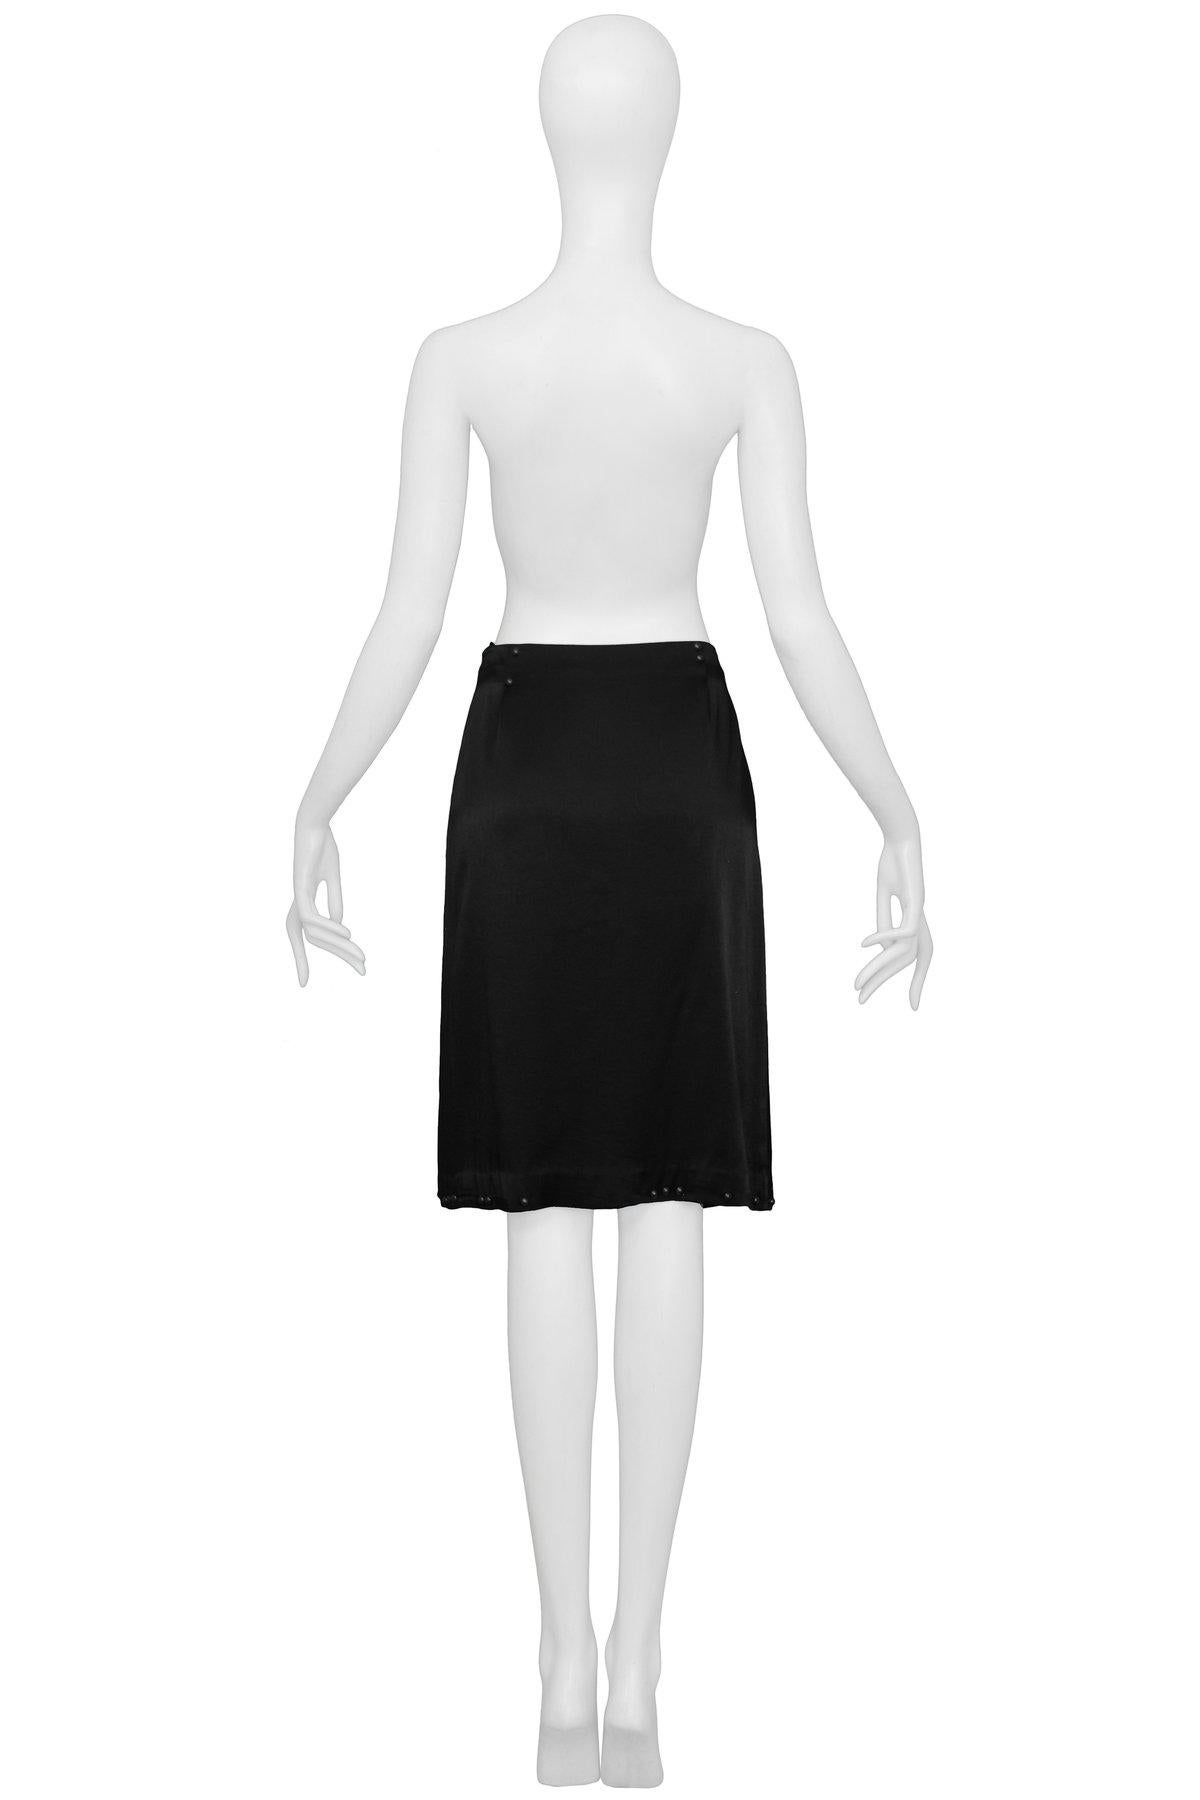 Maison Martin Margiela Black Satin Skirt With Studs 2006 In Excellent Condition For Sale In Los Angeles, CA